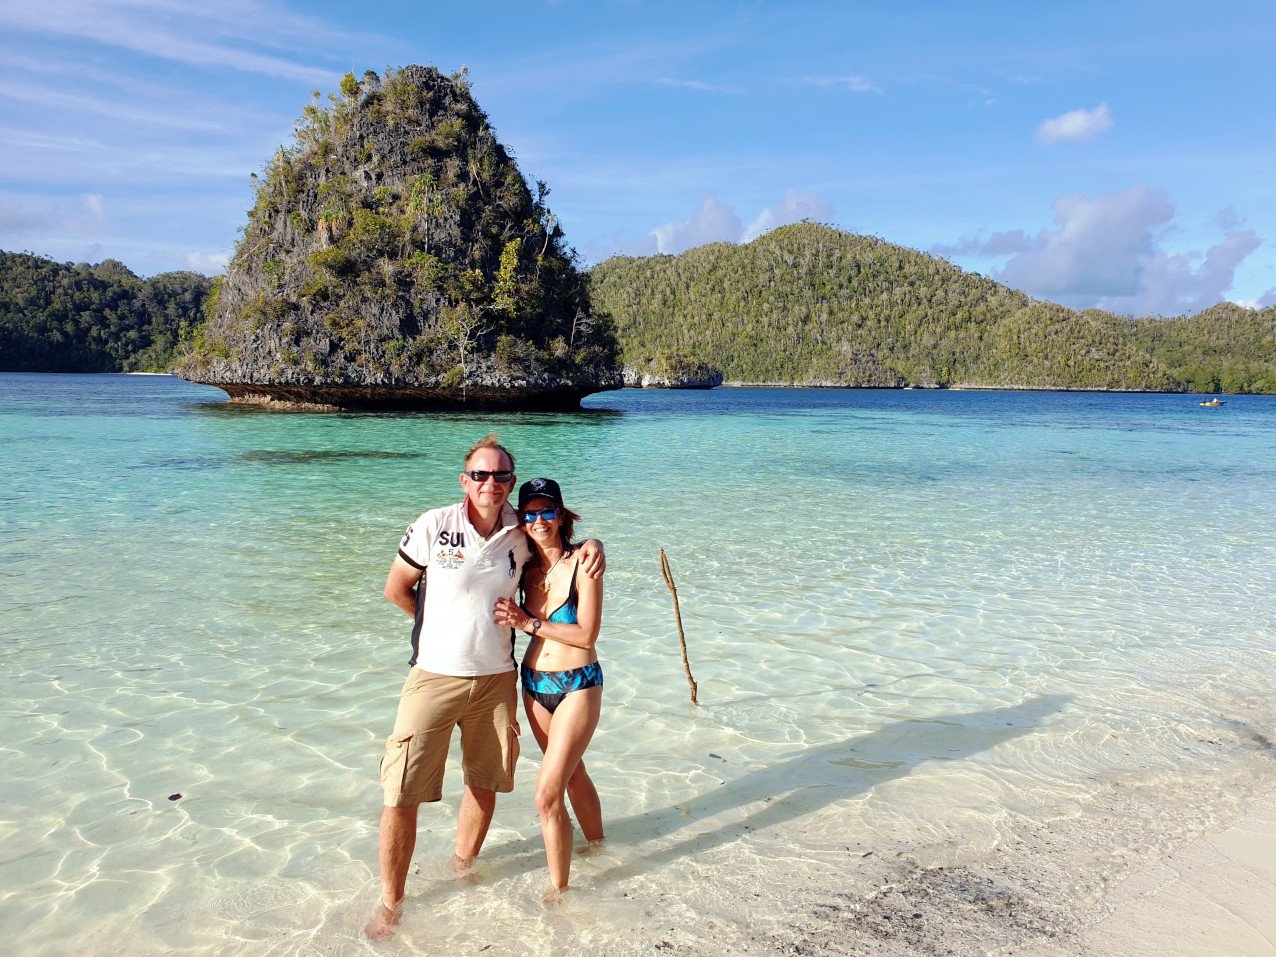 (English) two Papua Explorers Returning Guests on a white sand beach at the Wayag Islands in Raja Ampat